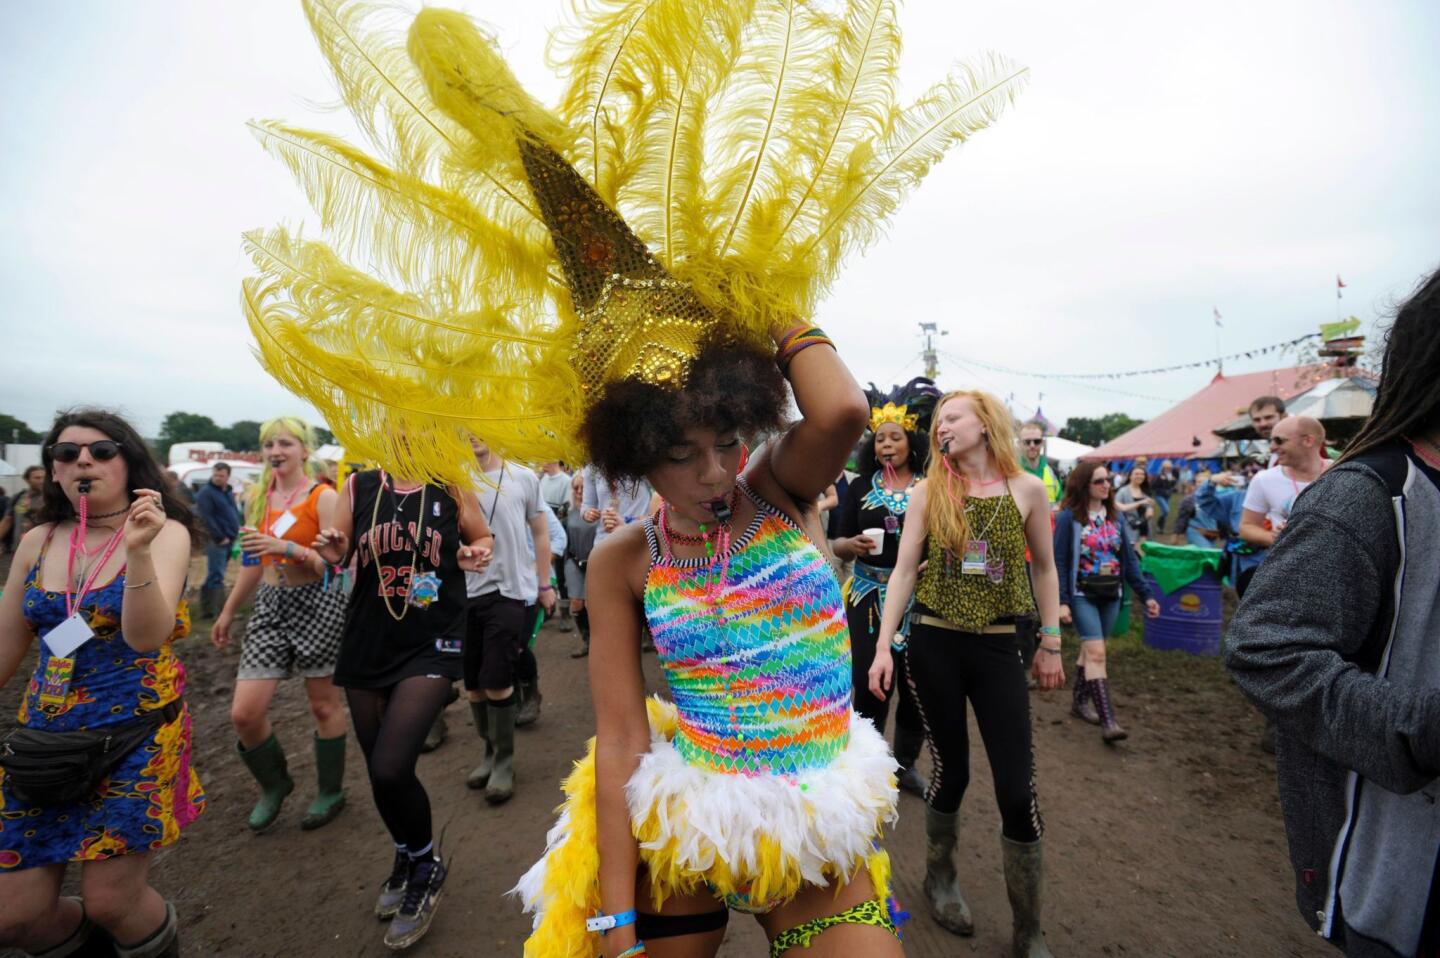 Festival goers make their way through the site at the Glastonbury Festival of Contemporary Performing Arts 2016.